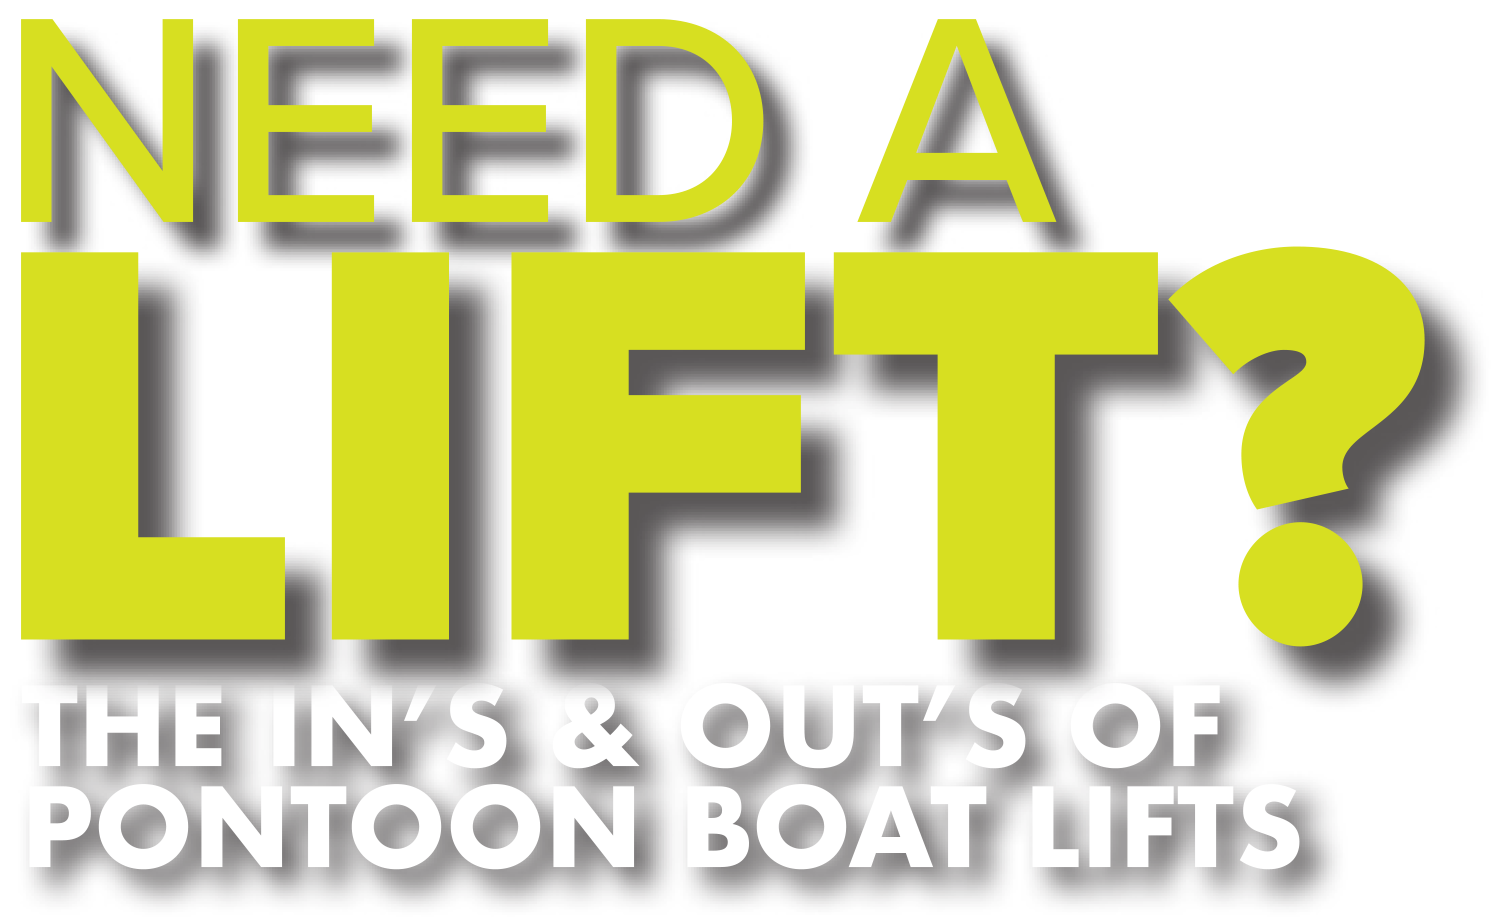 Need a Lift?: The in’s & out’s of pontoon boat lifts